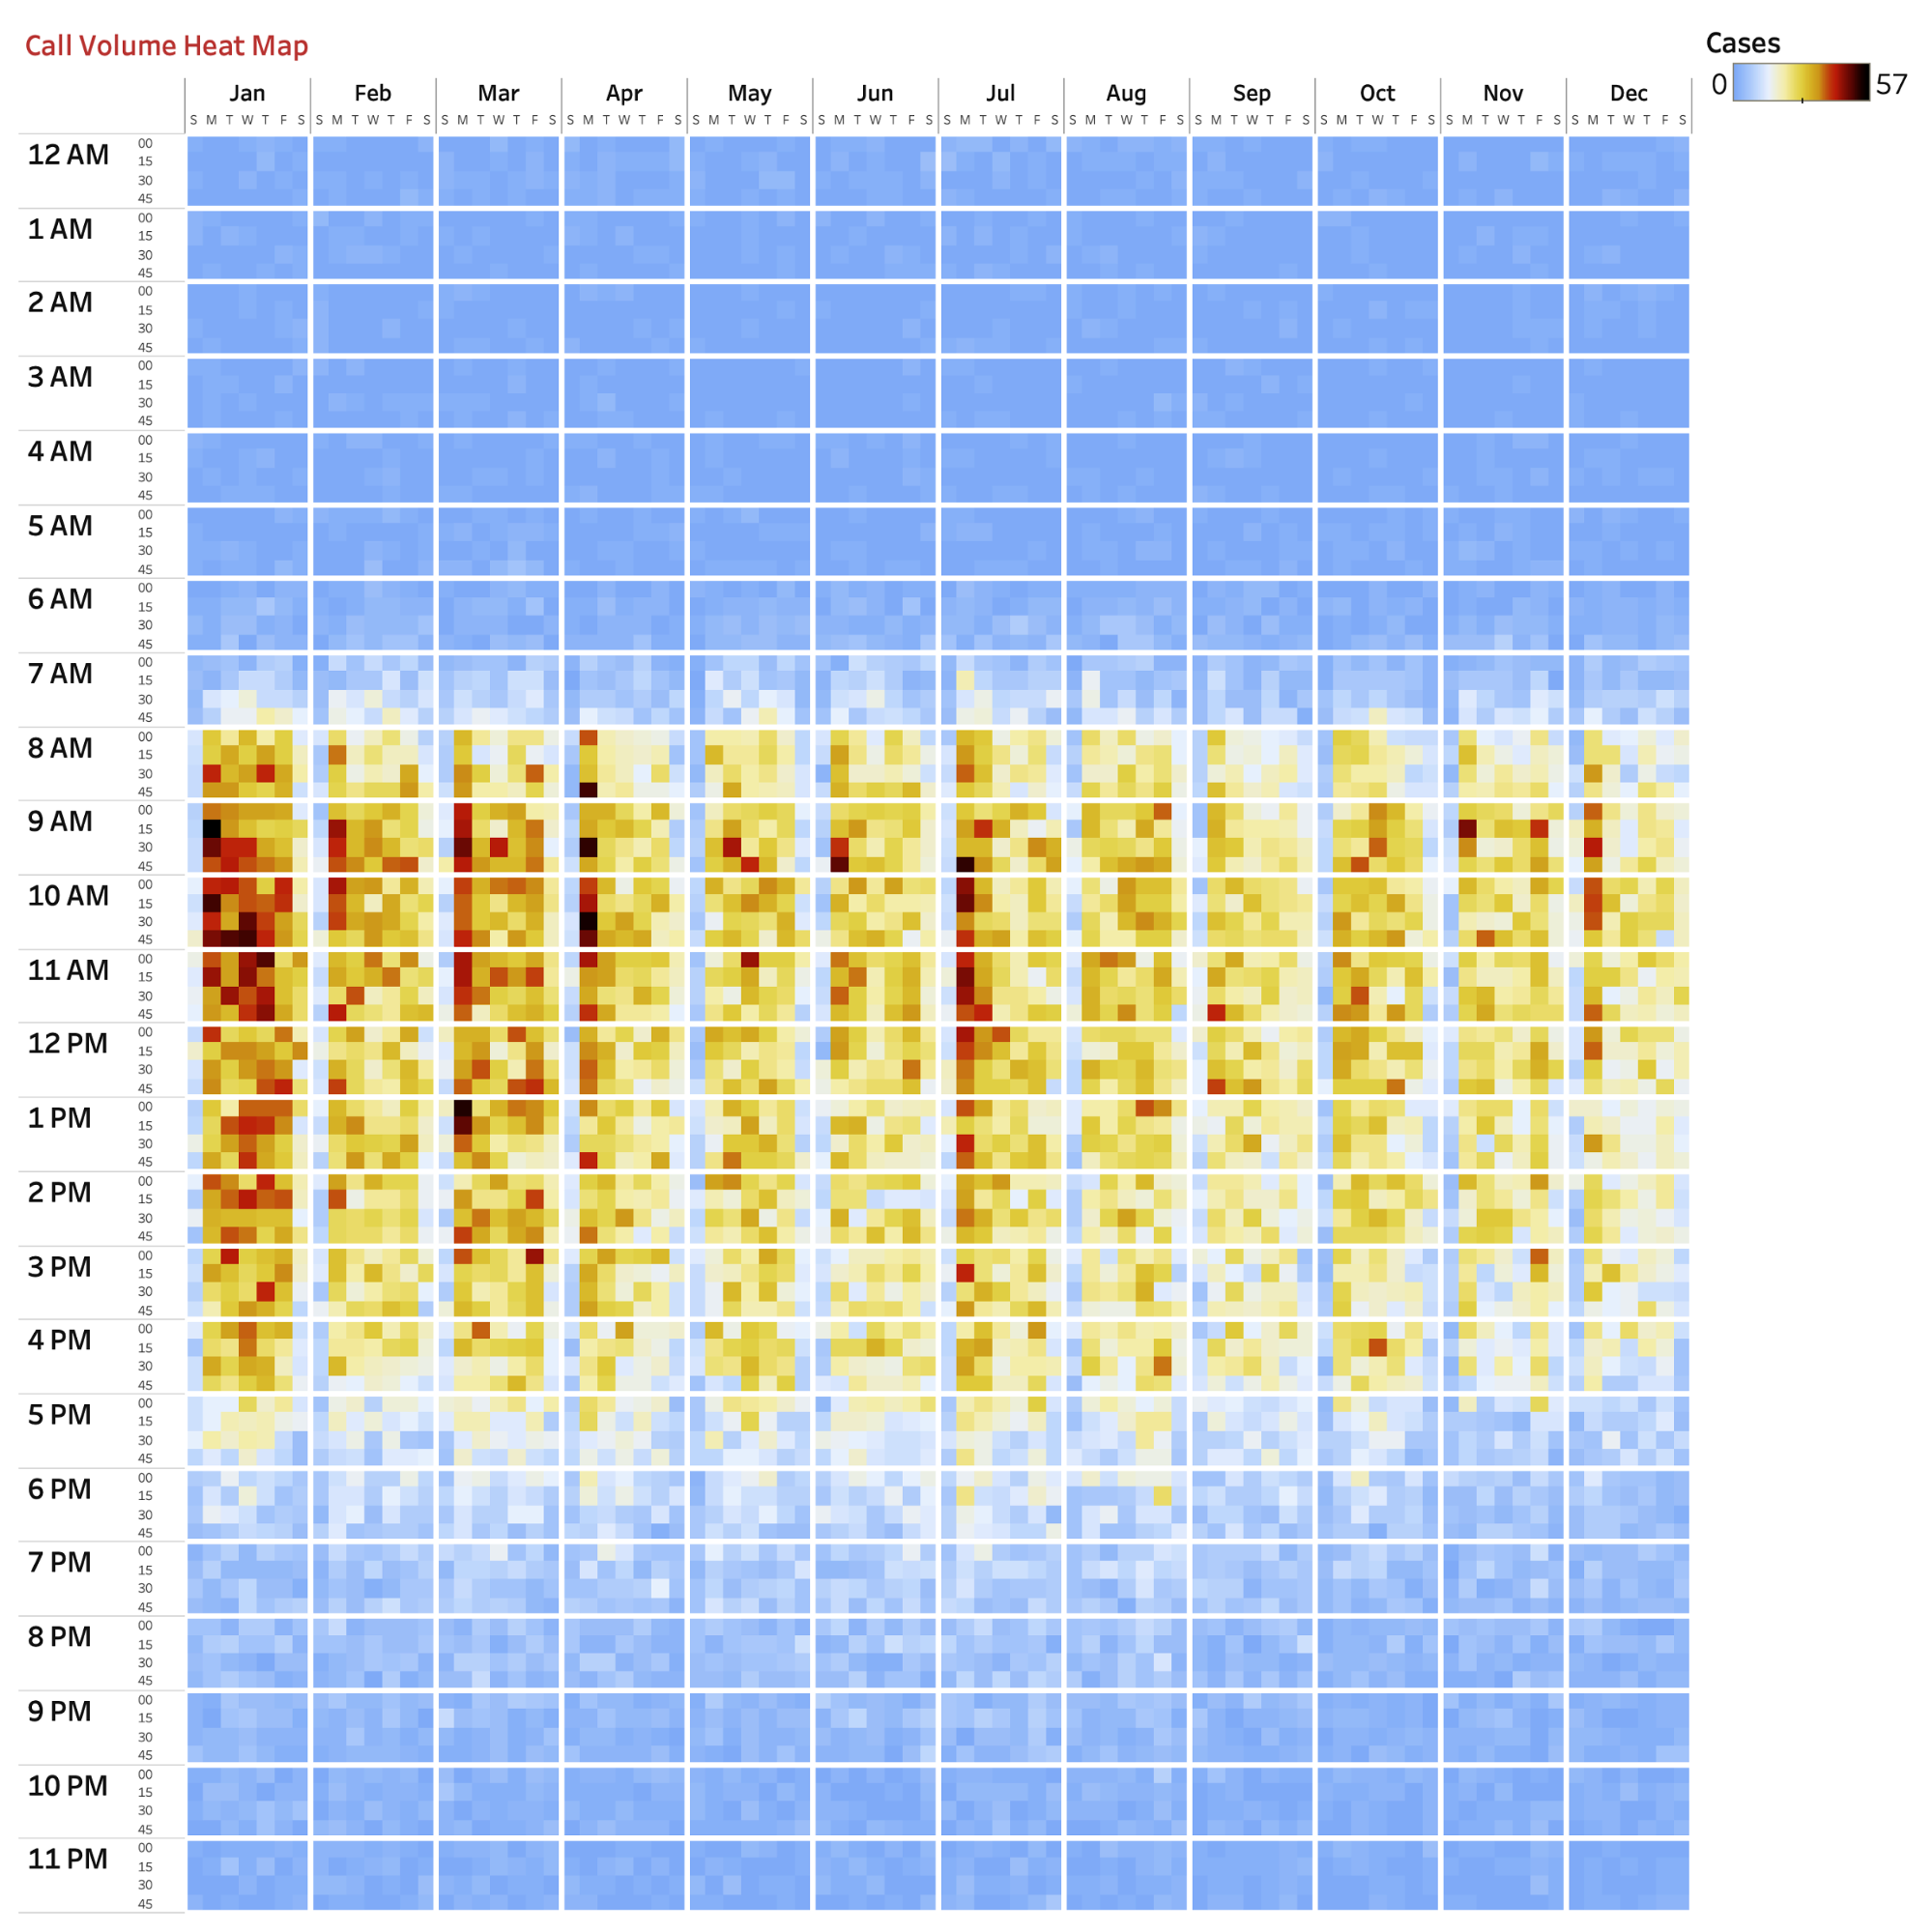 Total calls every 15 minutes of the day by month and day of the week using a heatmap